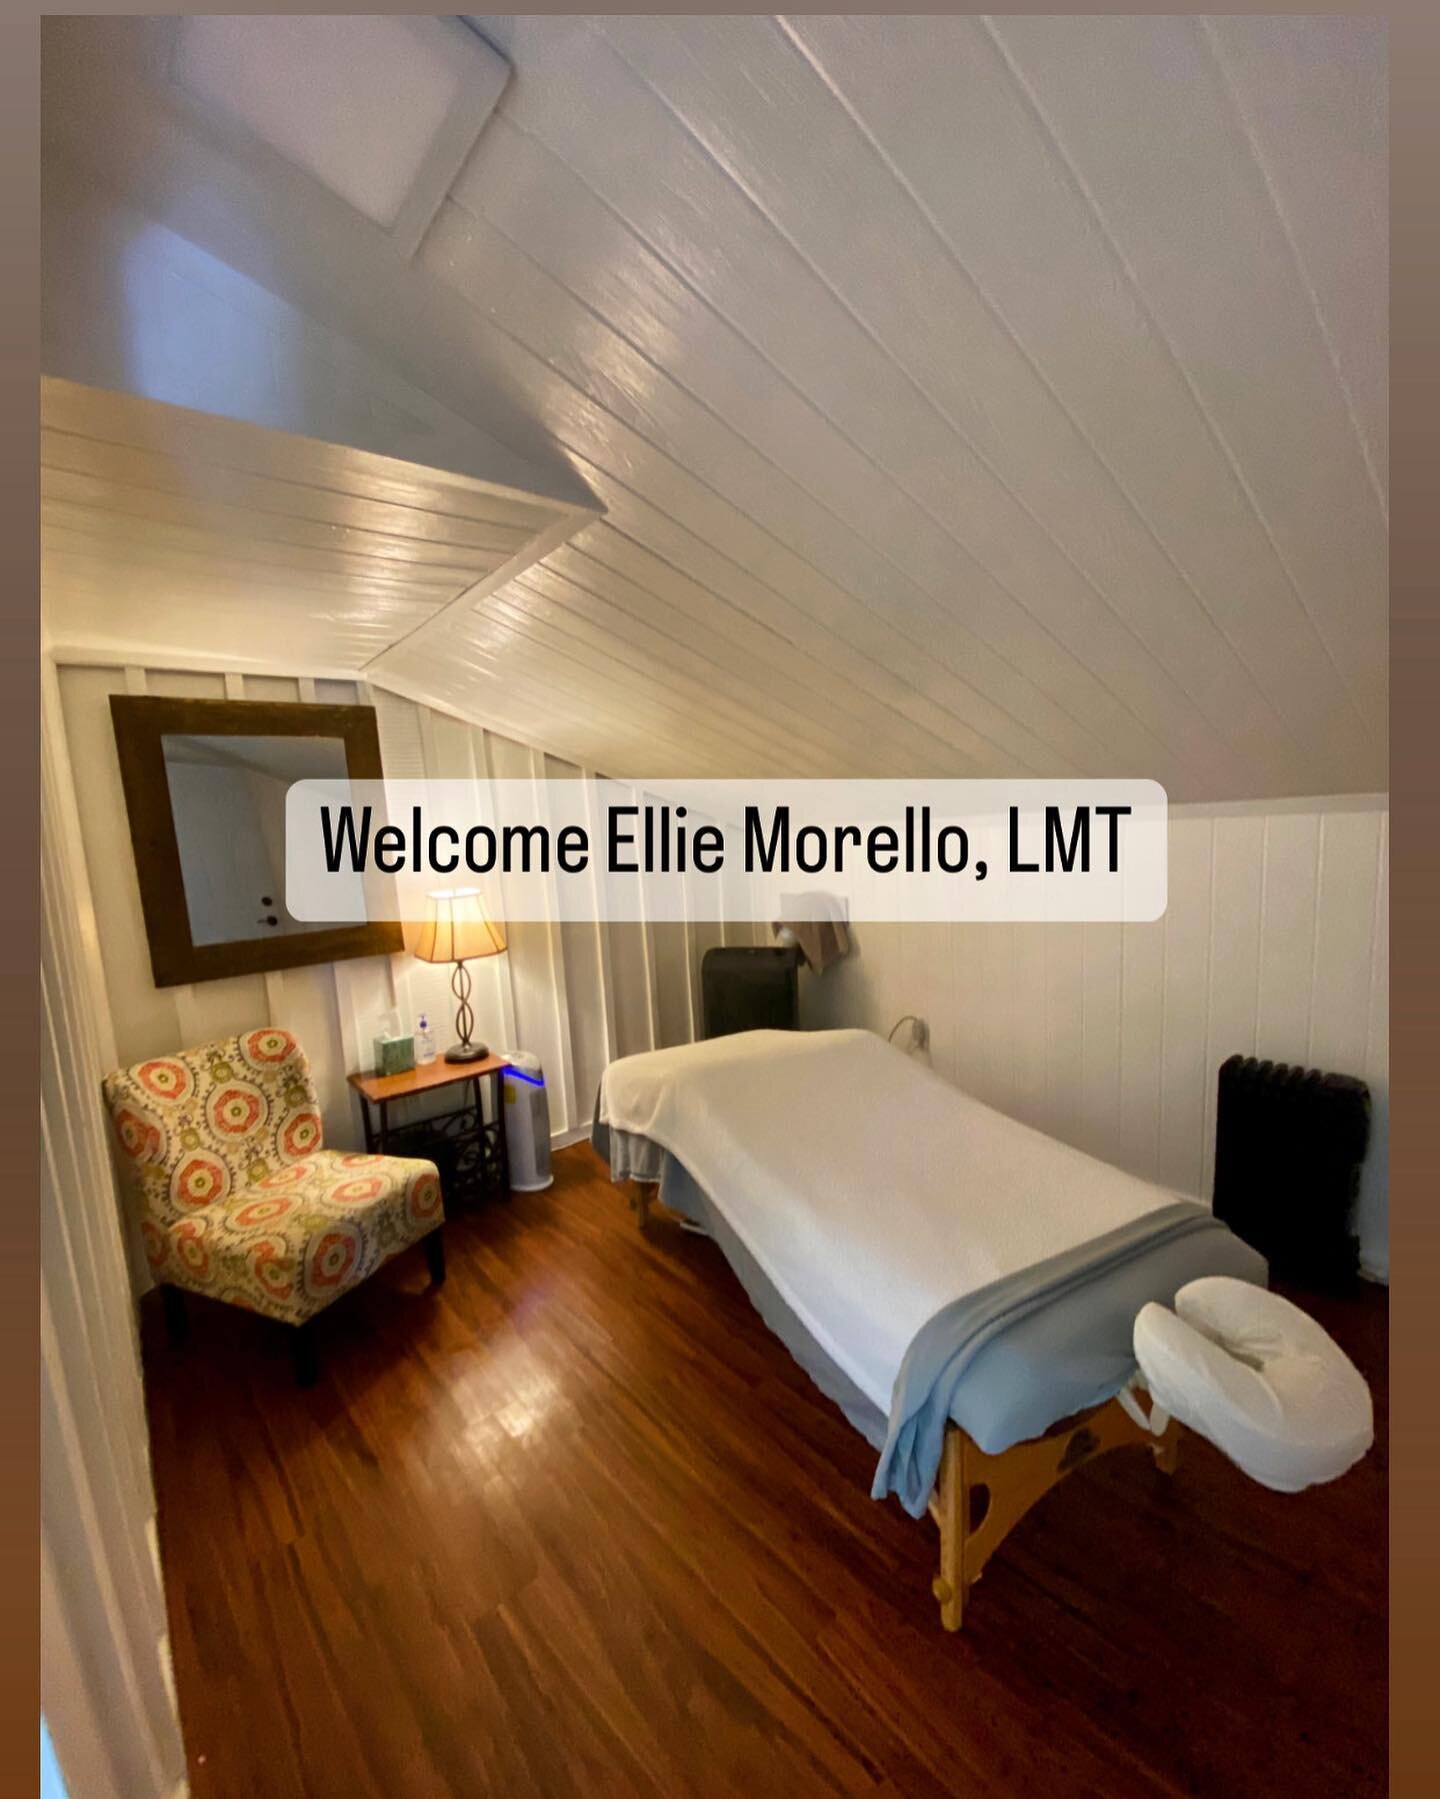 FLASH WEEKEND MASSAGE OPENINGS! Welcome to the team our new massage therapist, Ellie Morello! Ellie&rsquo;s calendar will be open beginning Sunday January 22nd. As an exclusive treat for our IG followers, I am offering her first days of availability 